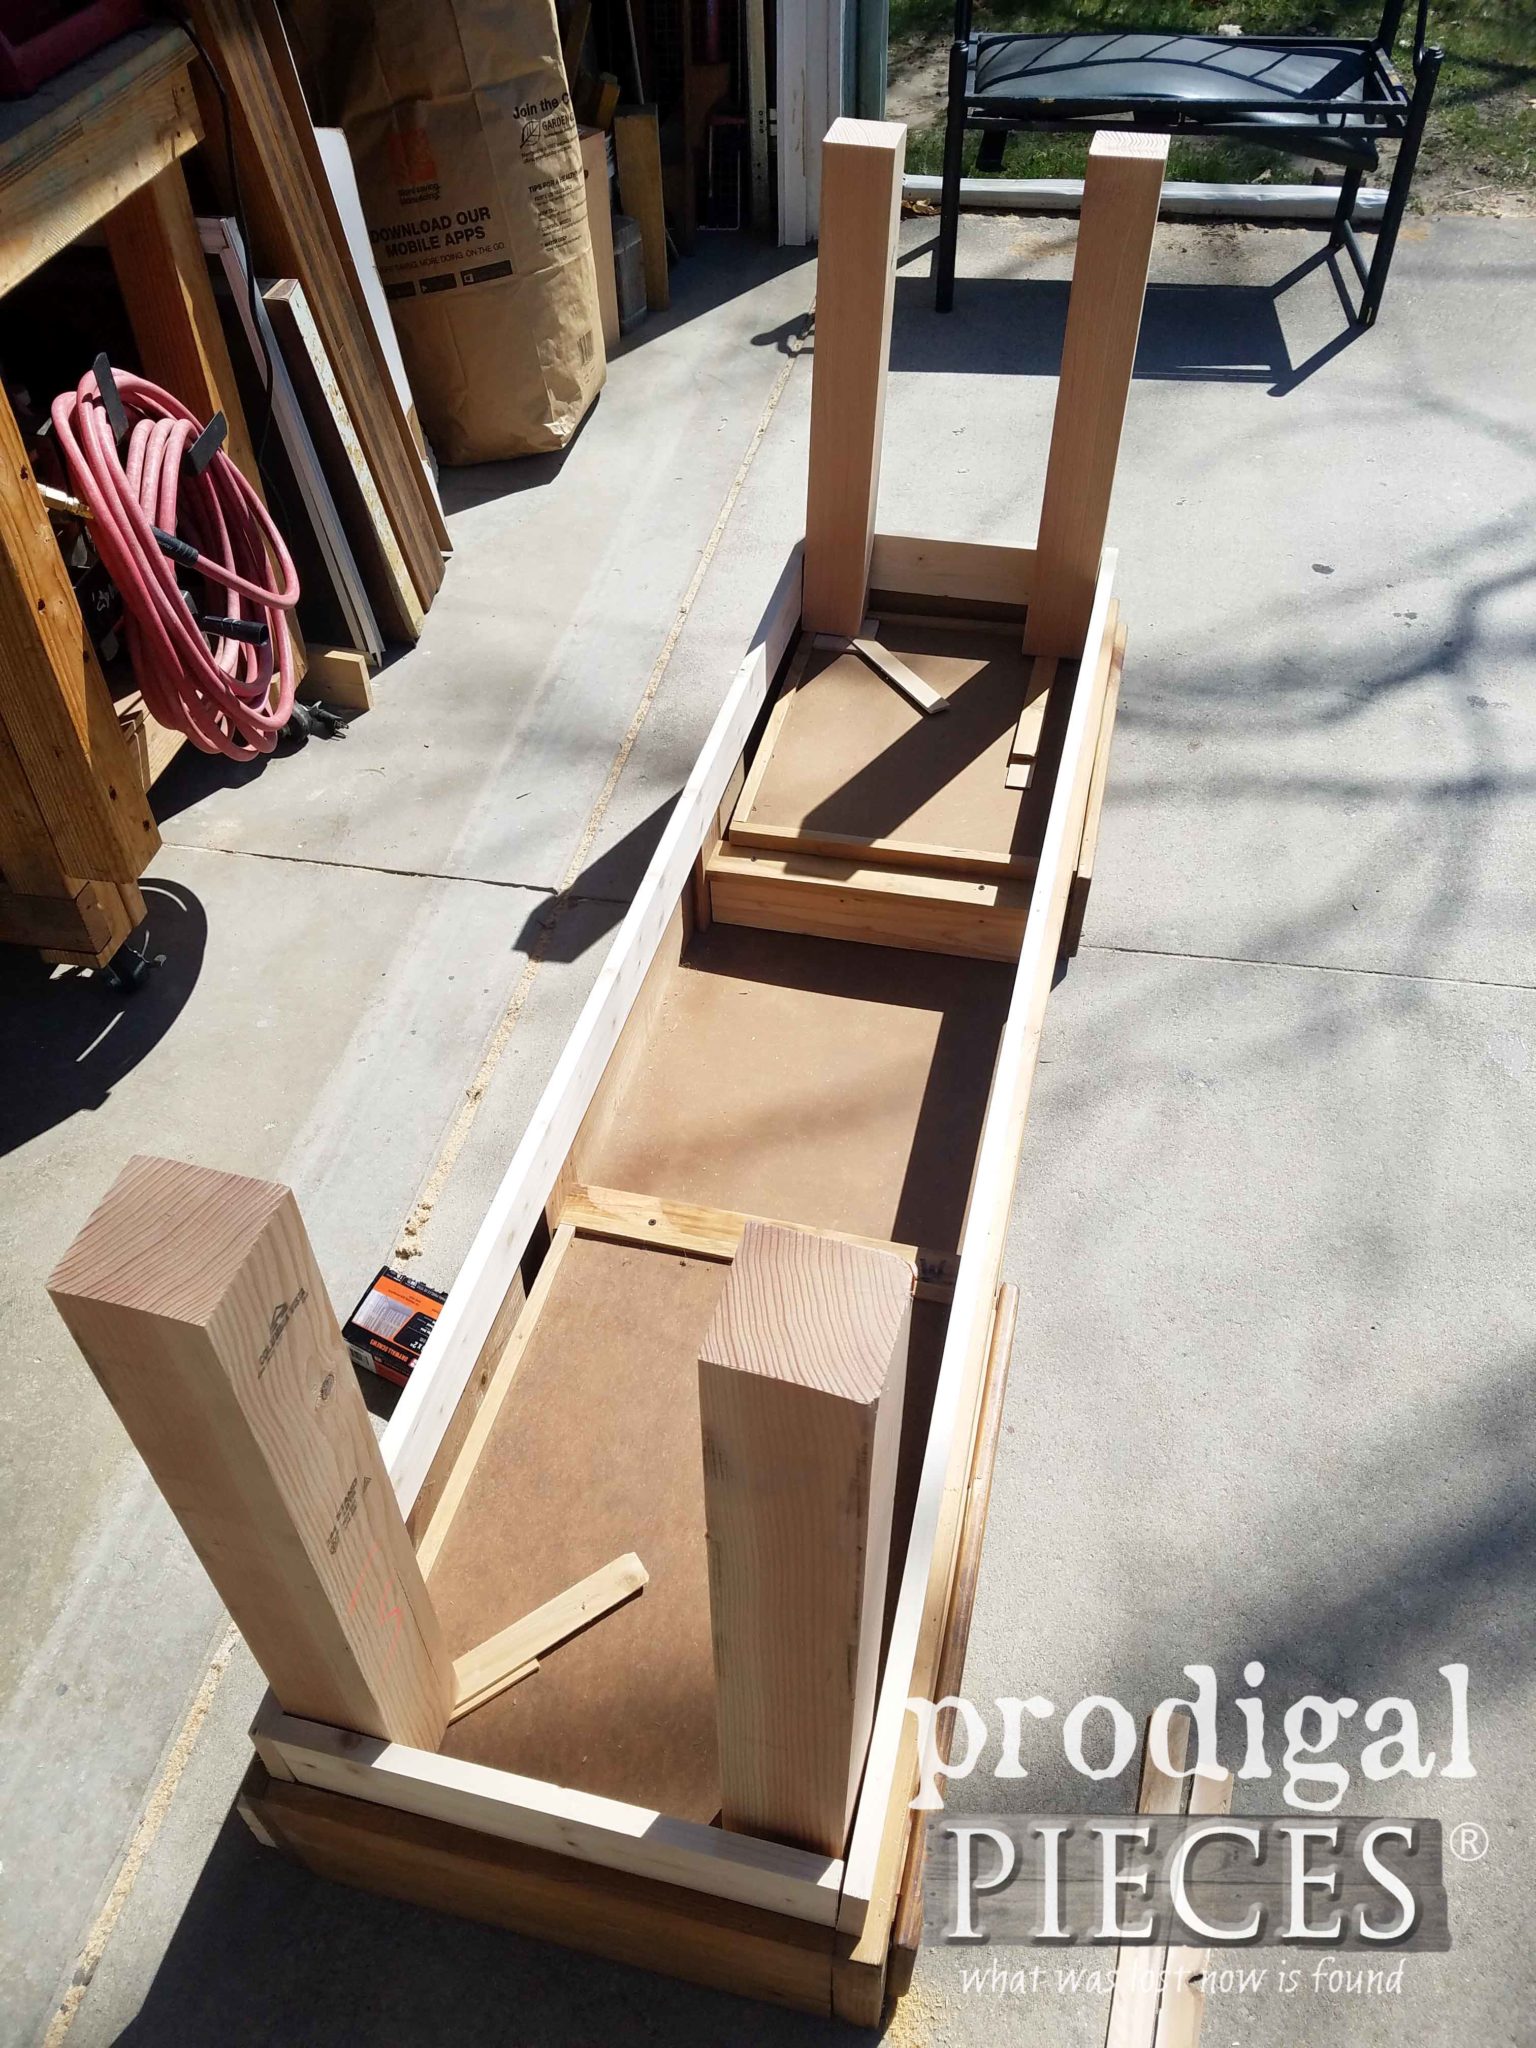 Building Workbench with Reclaimed and New Materials by Larissa of Prodigal Pieces | prodigalpieces.com